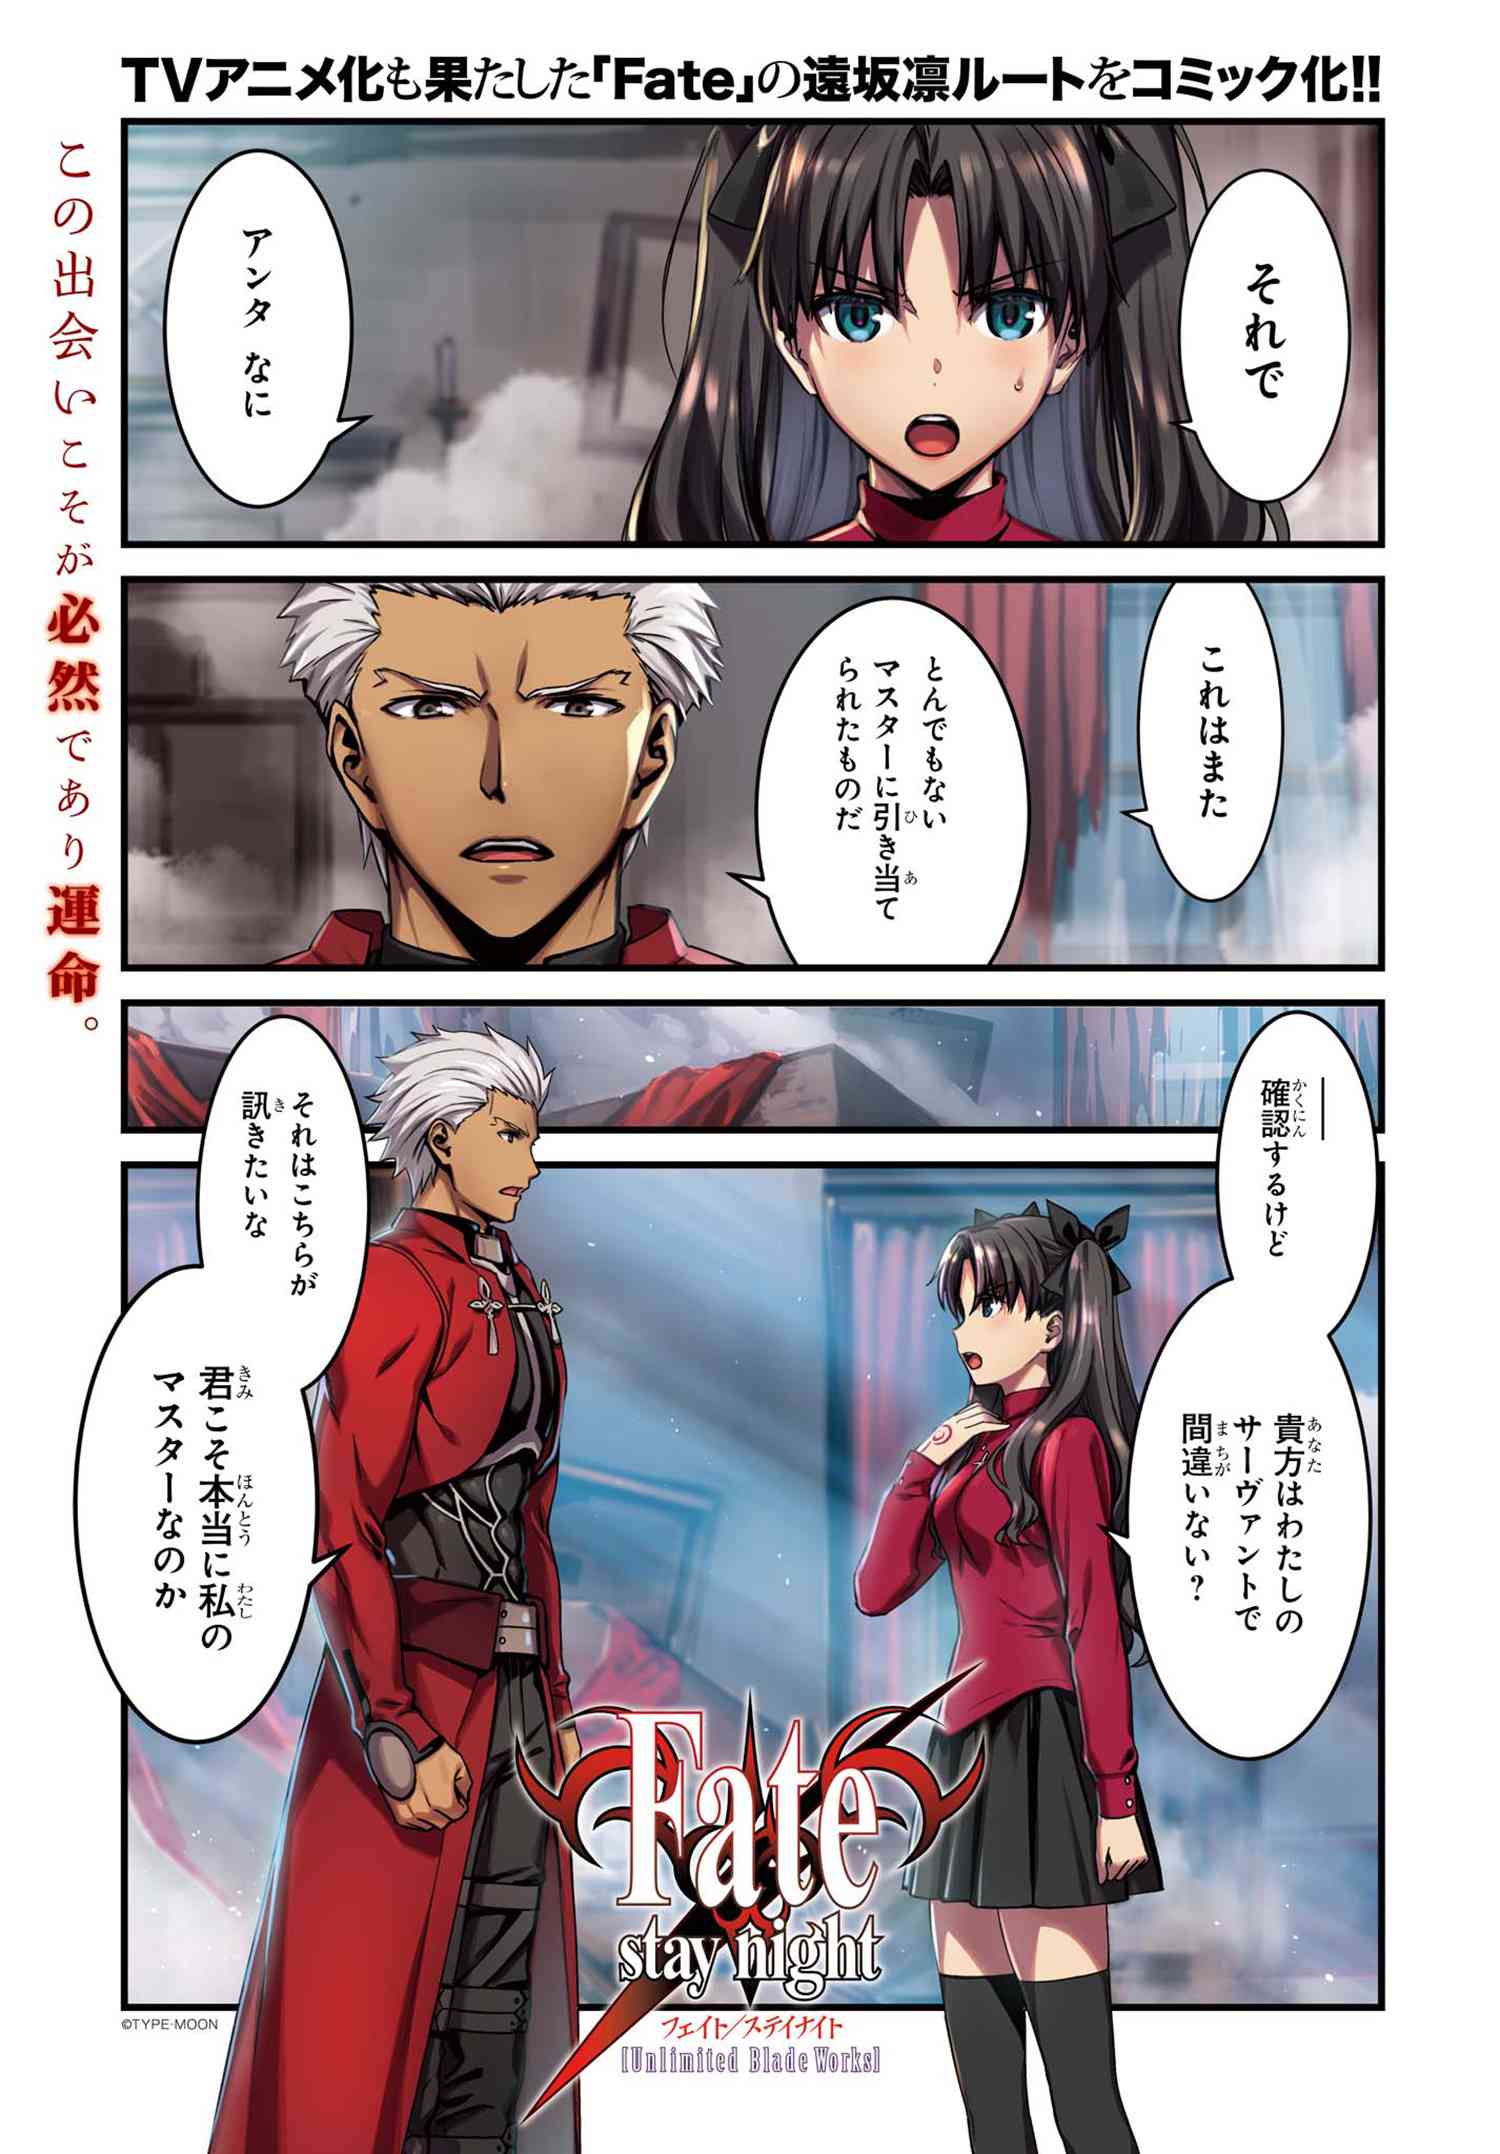 Fate Stay Night Unlimited Blade Works 1 1 プロローグ 前編 Type Moonコミックエース 無料 で漫画が読めるオンラインマガジン